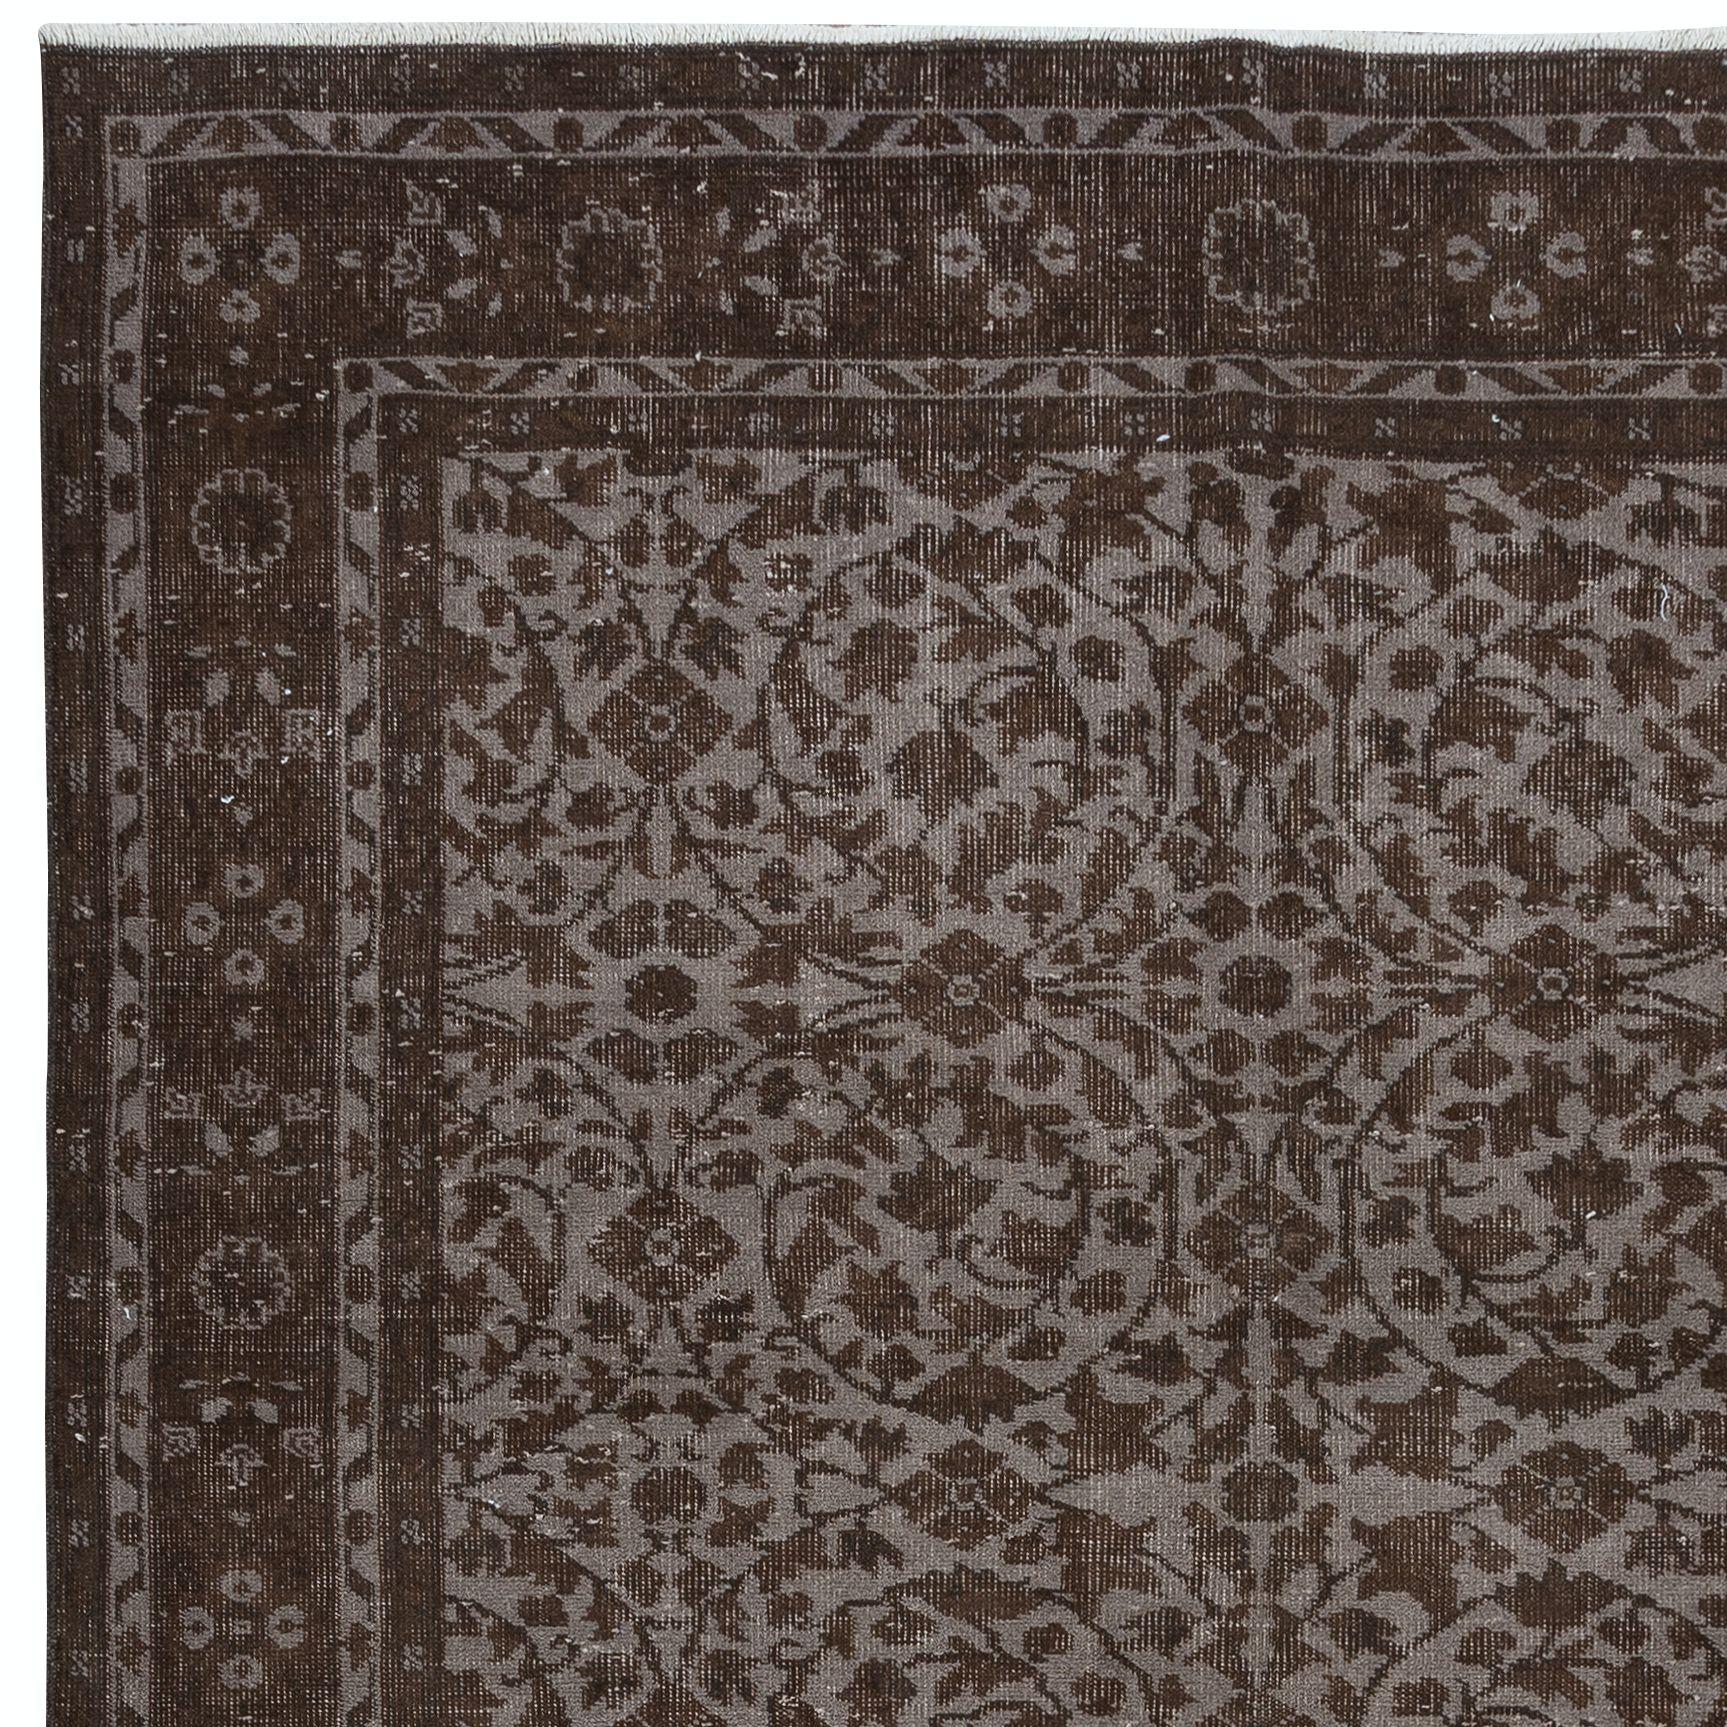 Hand-Woven 6x9.2 Ft Modern Brown Handmade Turkish Rug with All-Over Botanical Design For Sale